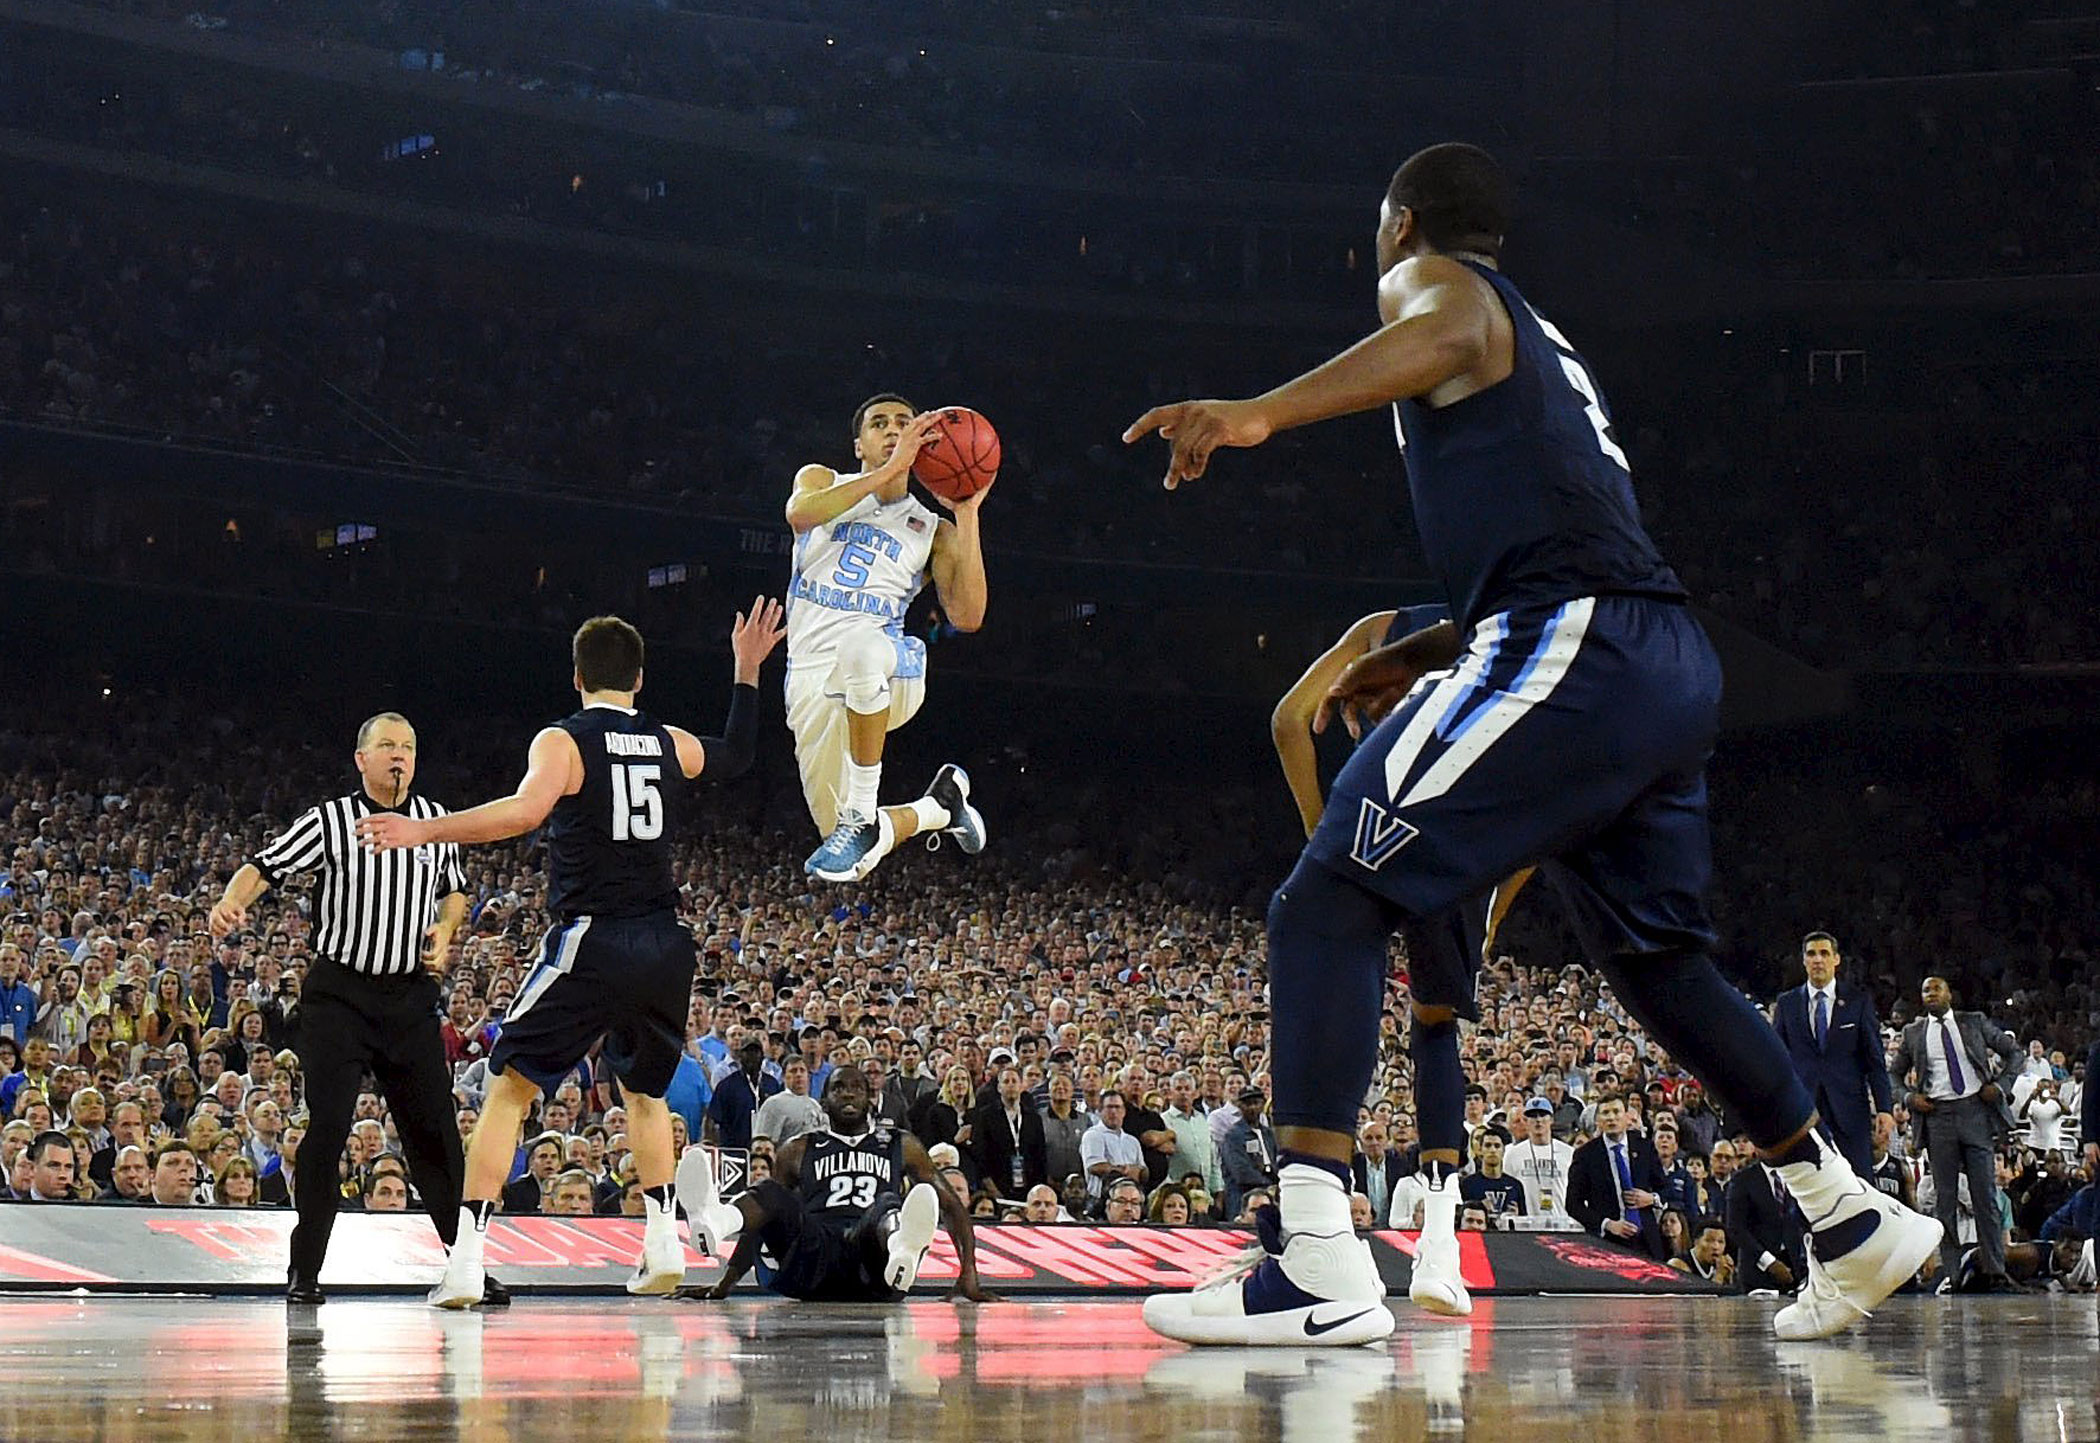 North Carolina Tar Heels guard Marcus Paige (5) shoots and scores a three-point basket against the Villanova Wildcats in the second half of the NCAA college basketball National Championship game on April 4, 2016 in Houston.